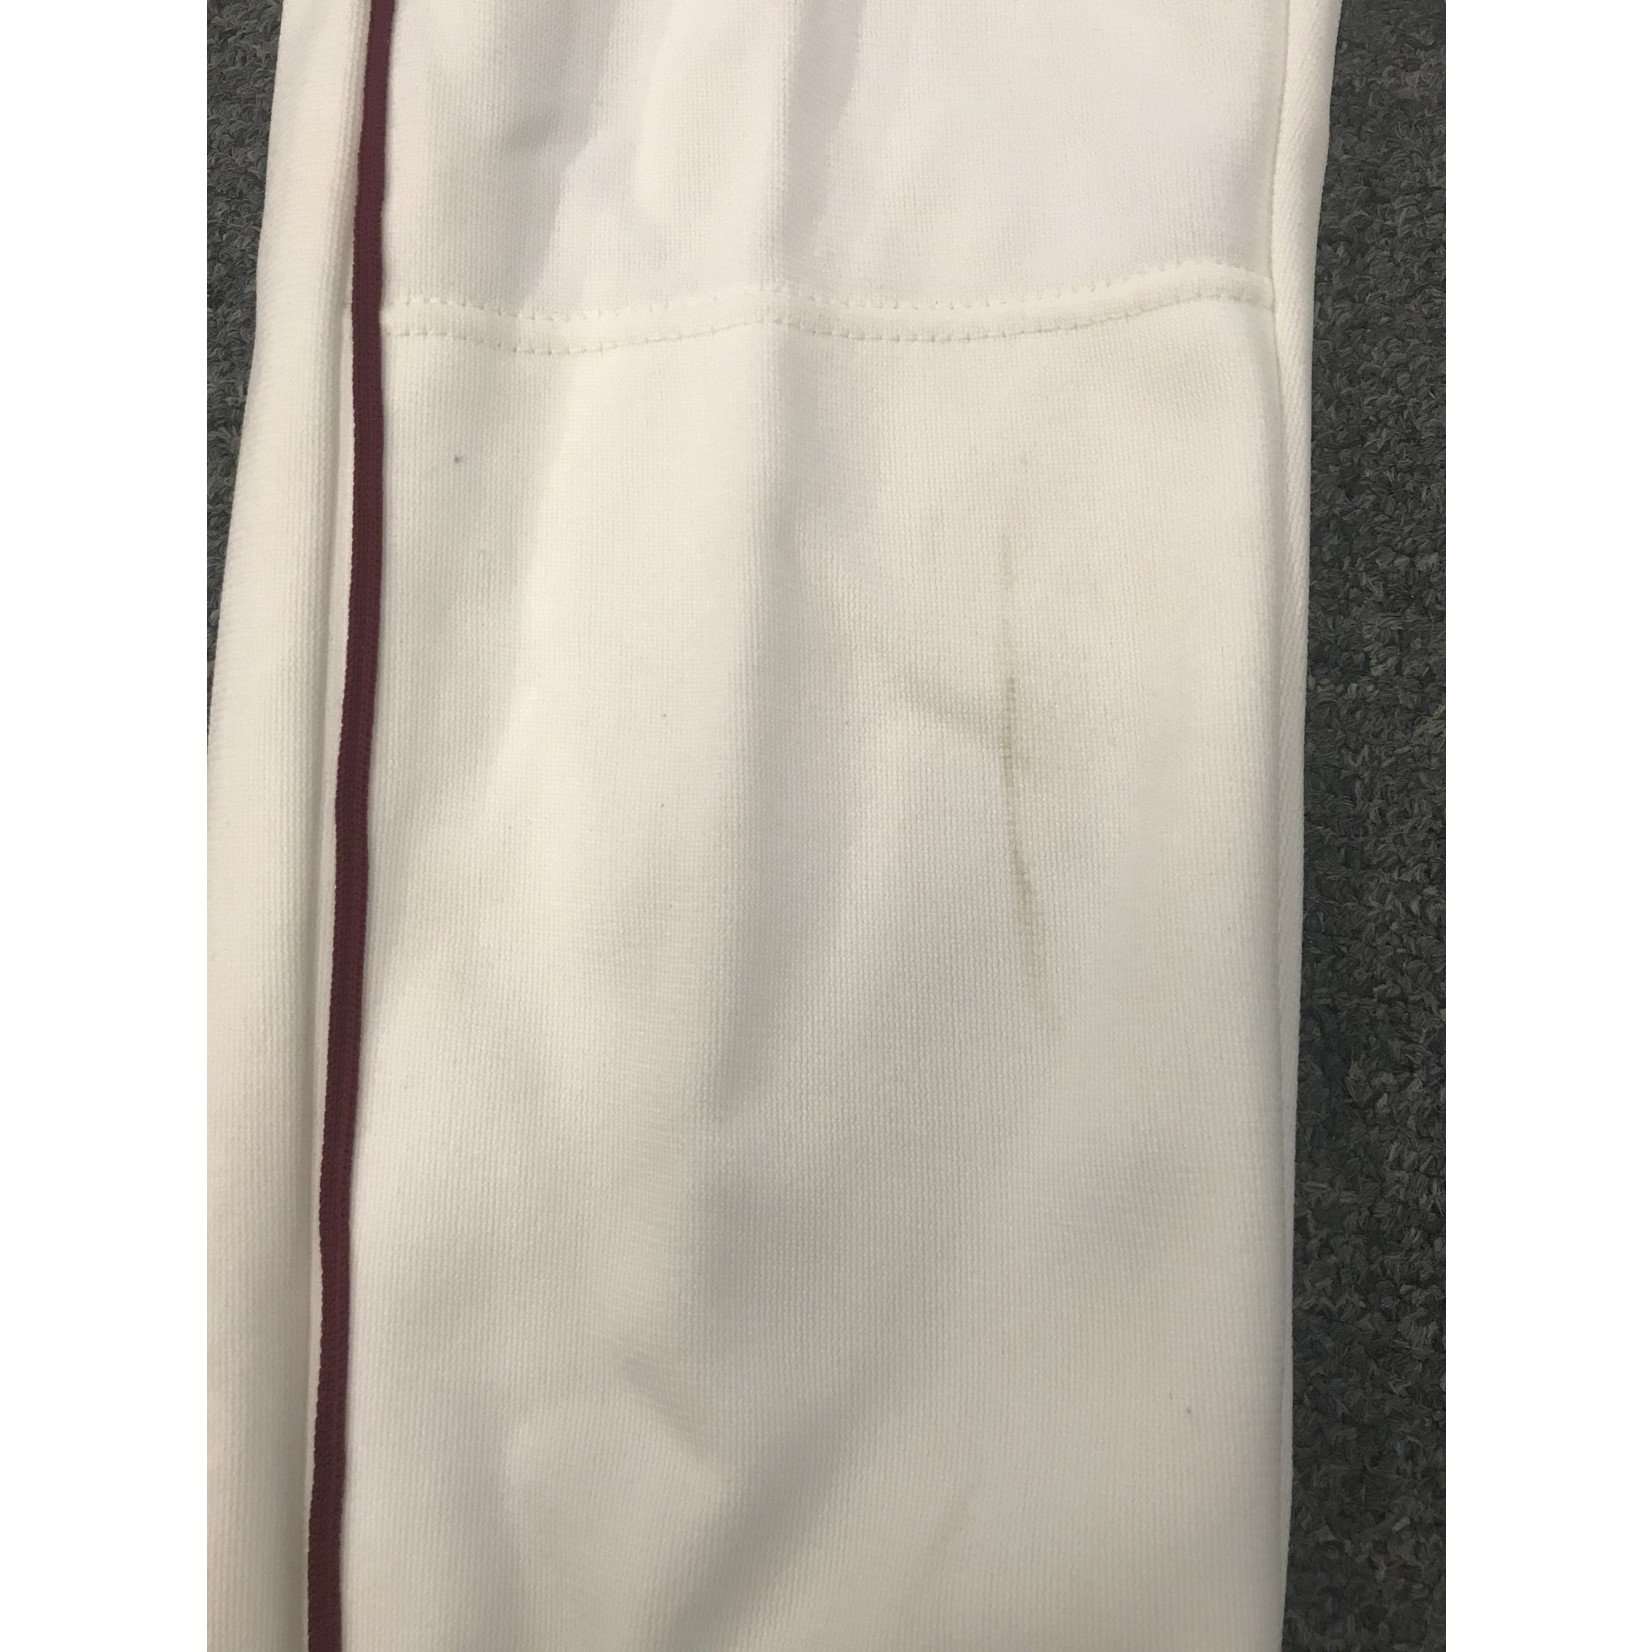 Rawlings Stained Rawlings Youth Medium Sample Pants Used for Team Sizing Samples (DISCOUNT)